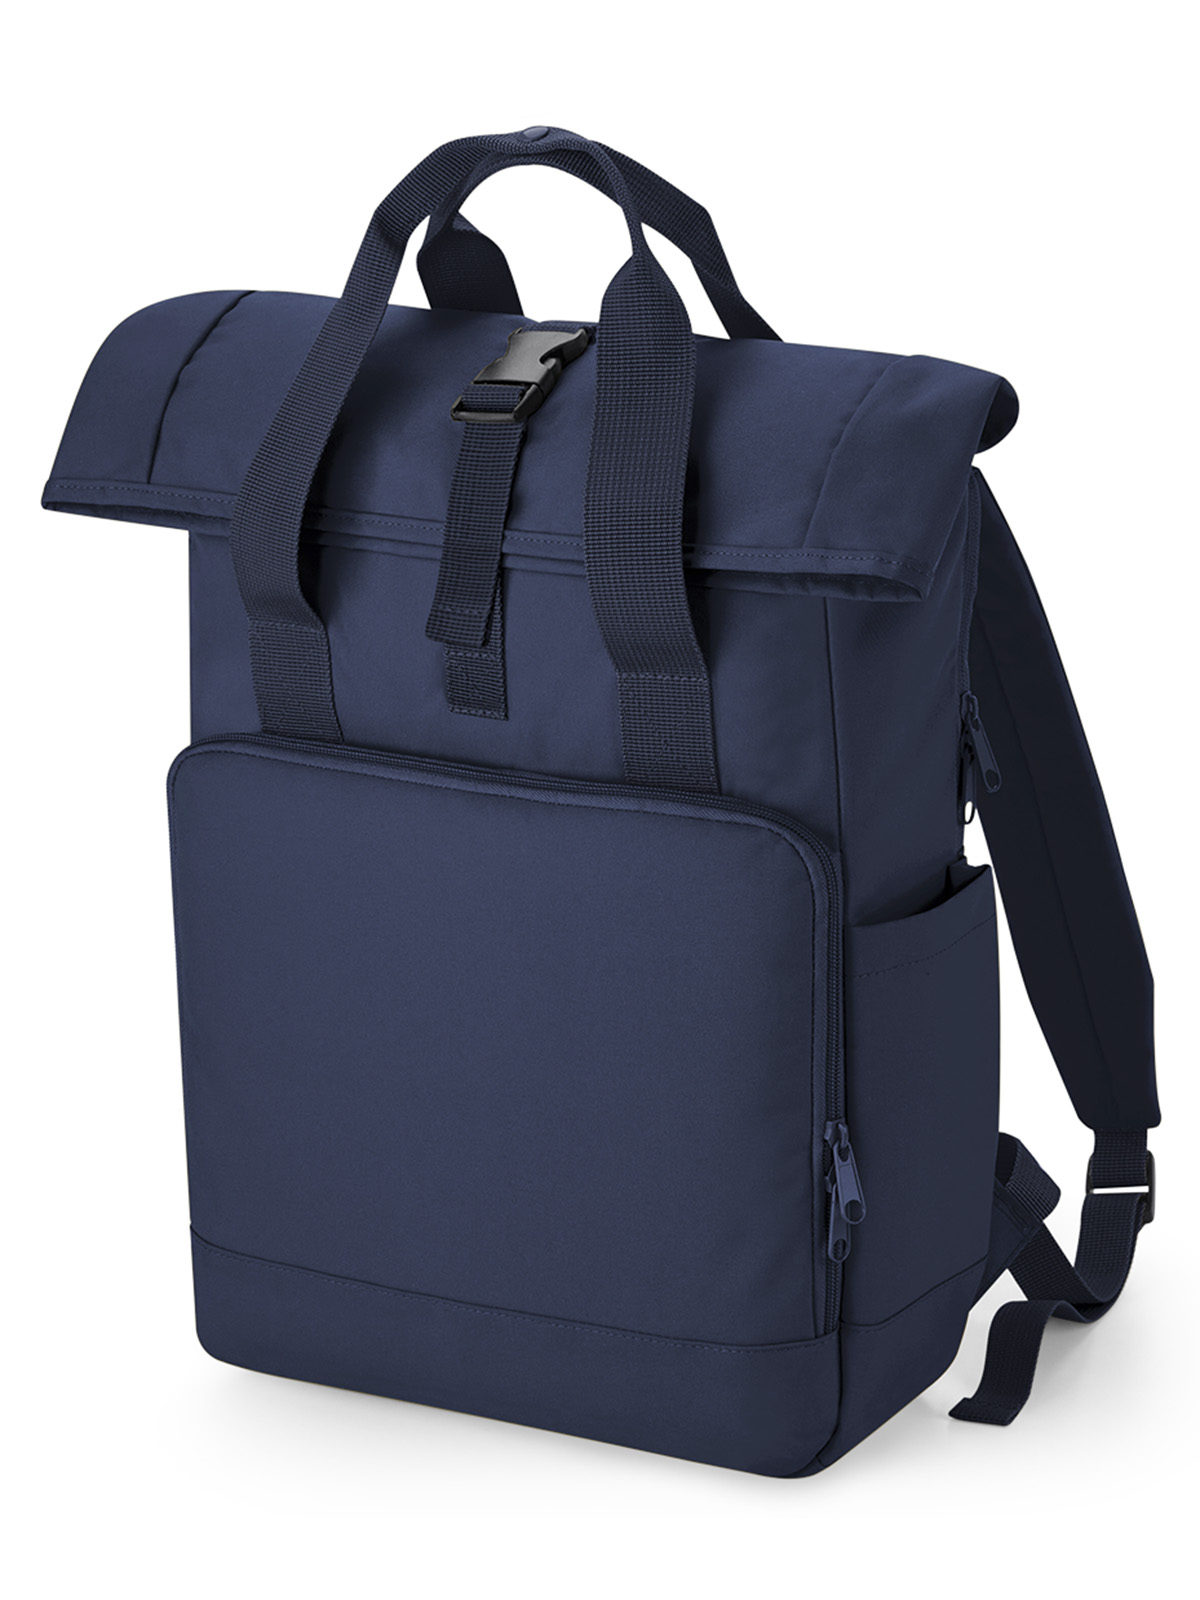 recycled-twin-handle-roll-top-laptop-backpack-navy-dusk.webp